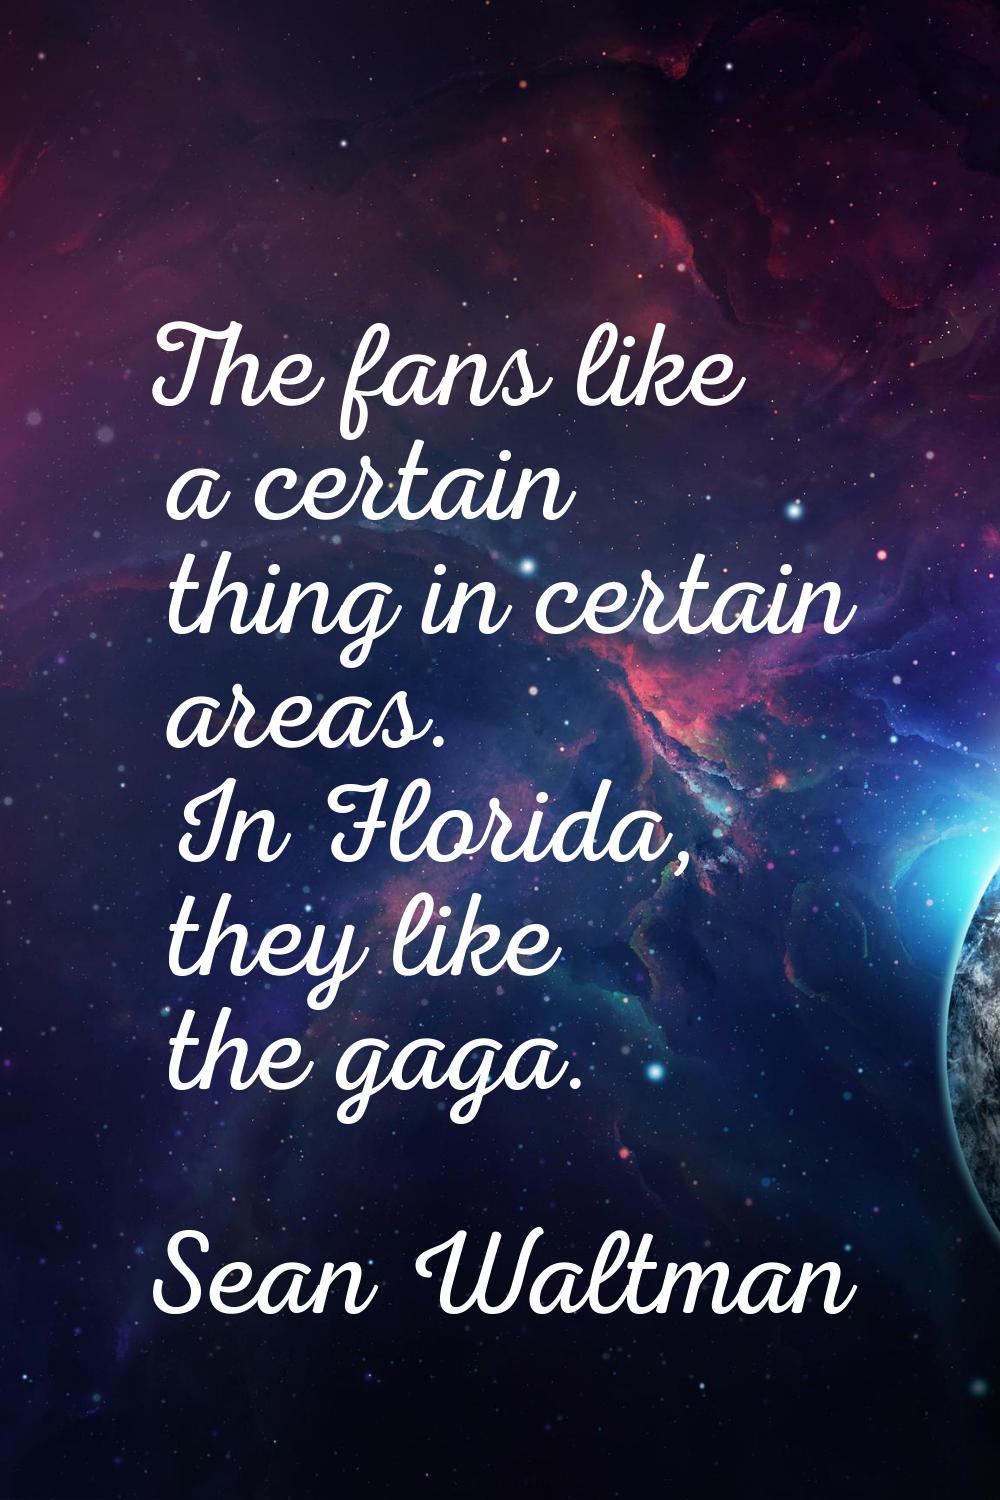 The fans like a certain thing in certain areas. In Florida, they like the gaga.